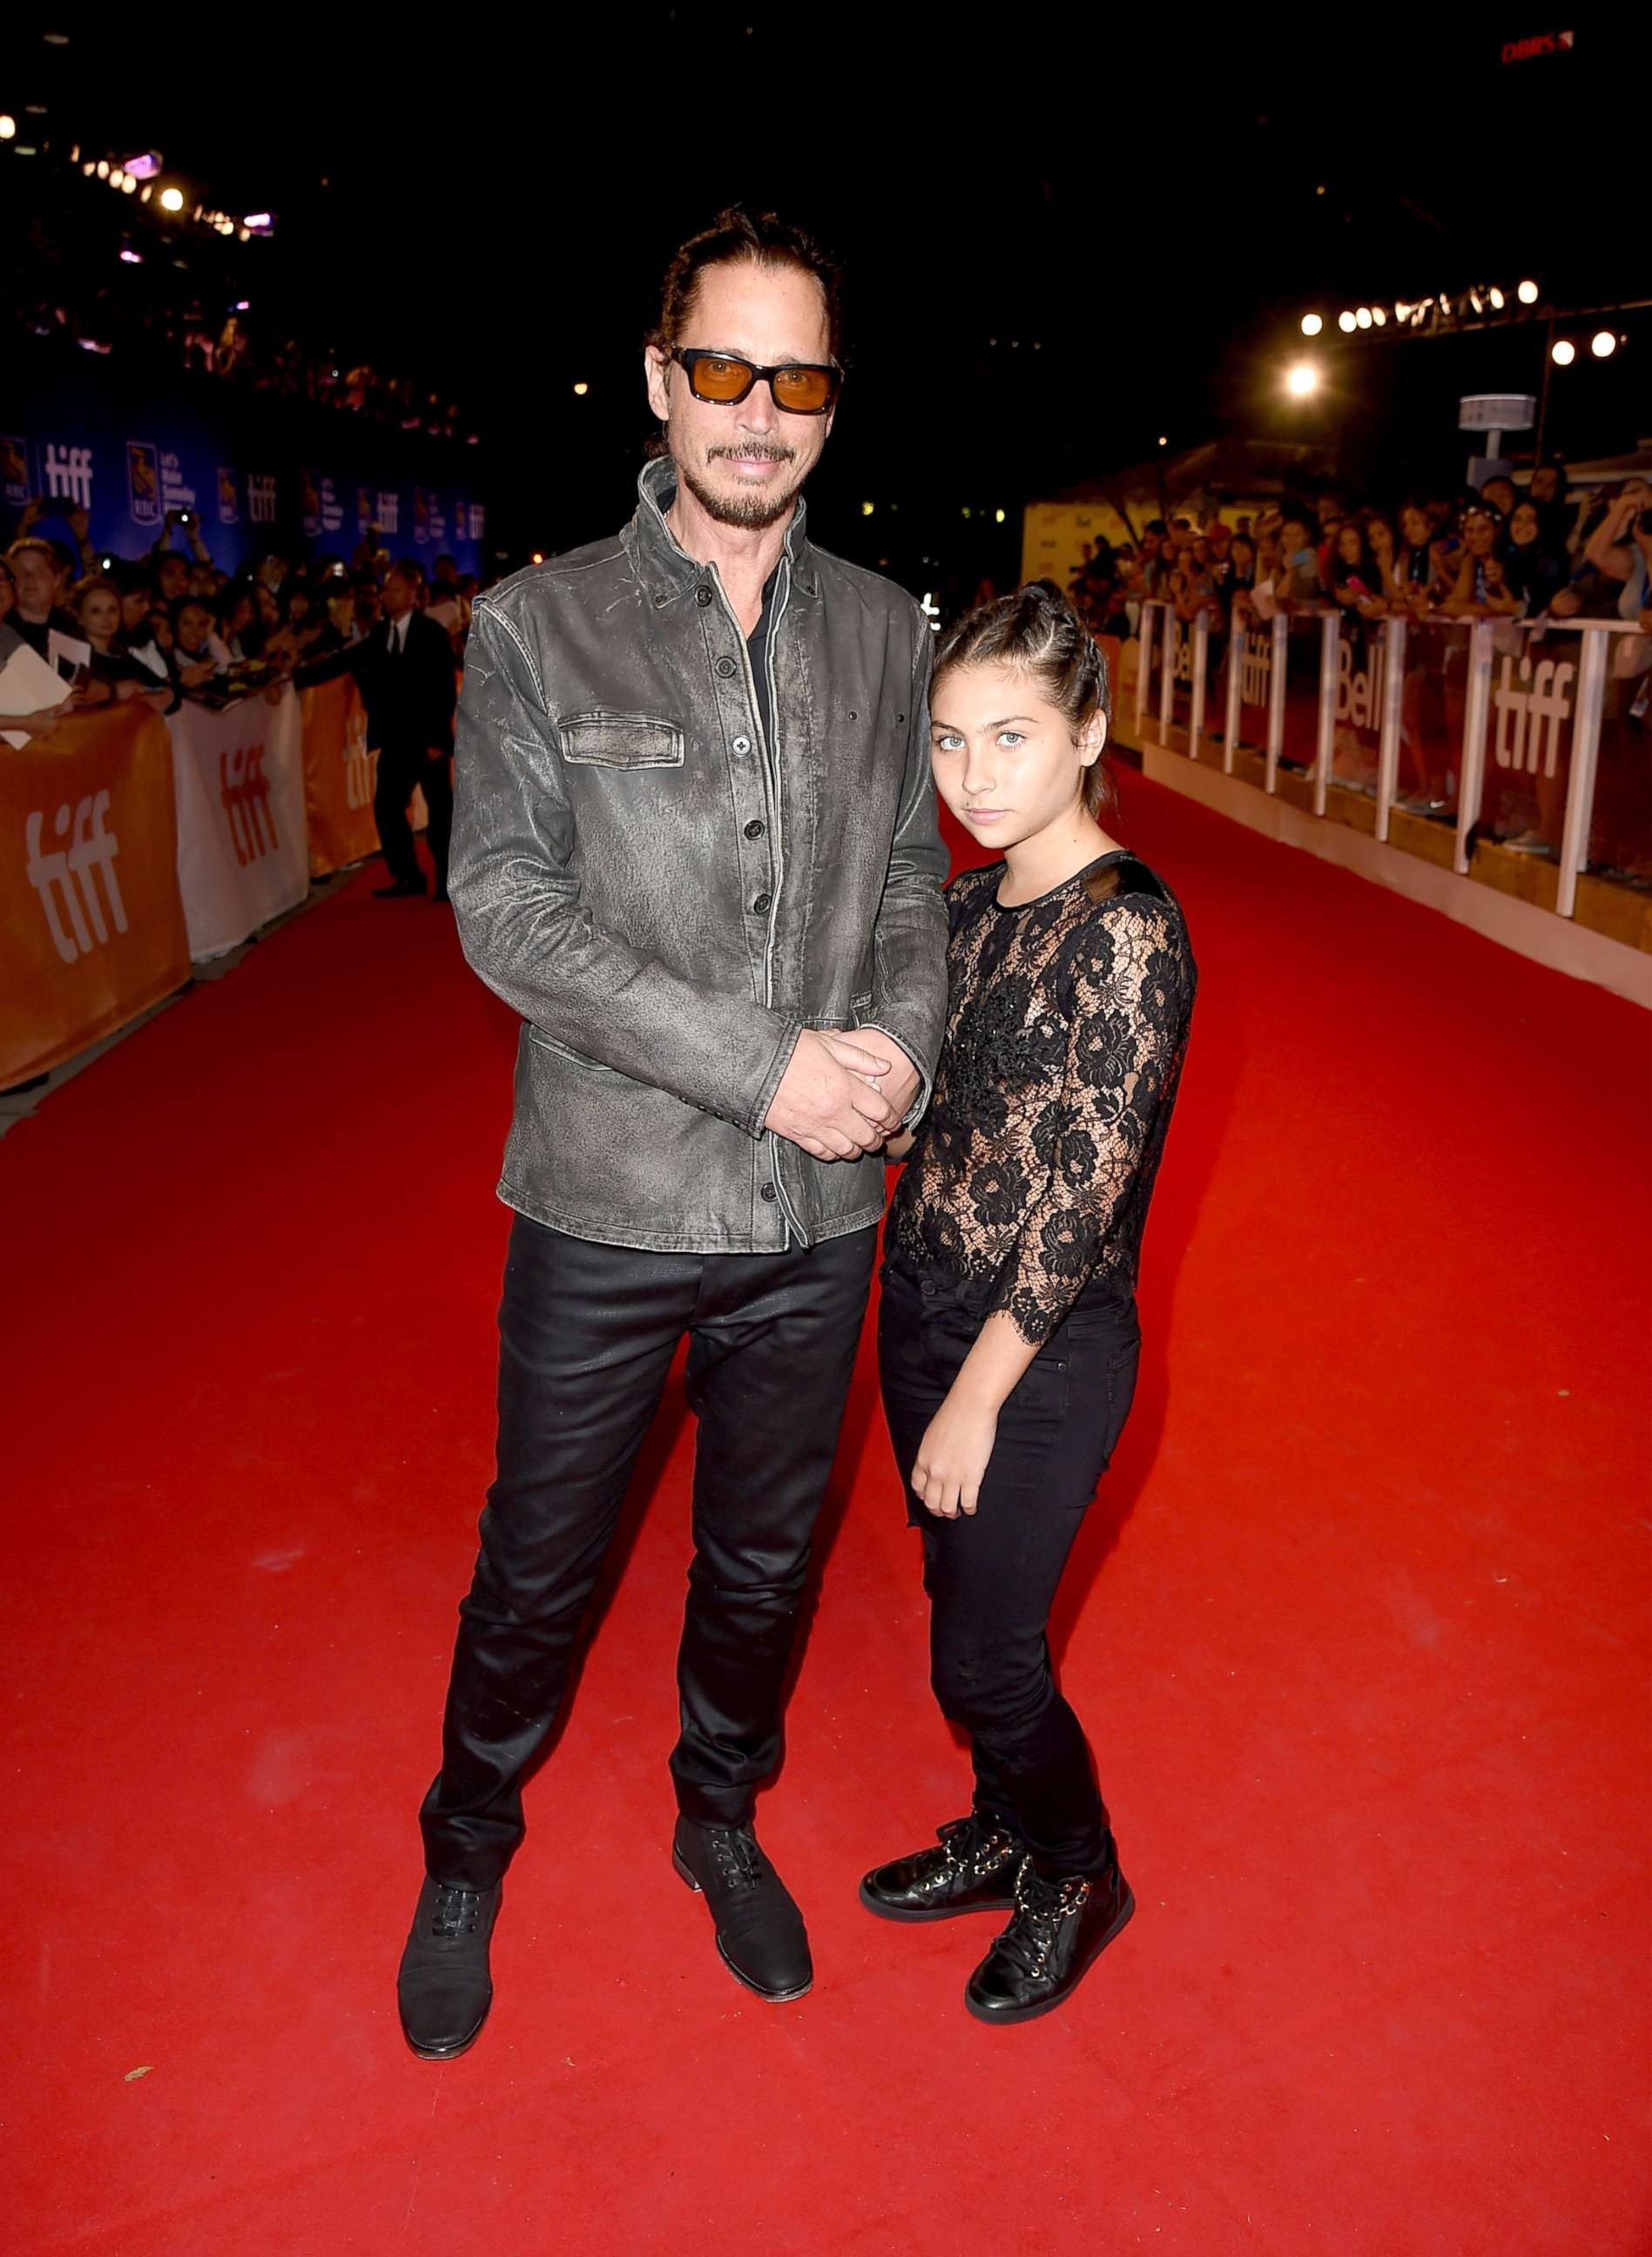 PHOTO: In this file photo, musician Chris Cornell and his daughter, Toni Cornell, attend the "The Promise" premiere during the 2016 Toronto International Film Festival at Roy Thomson Hall, Sept. 11, 2016, in Toronto.